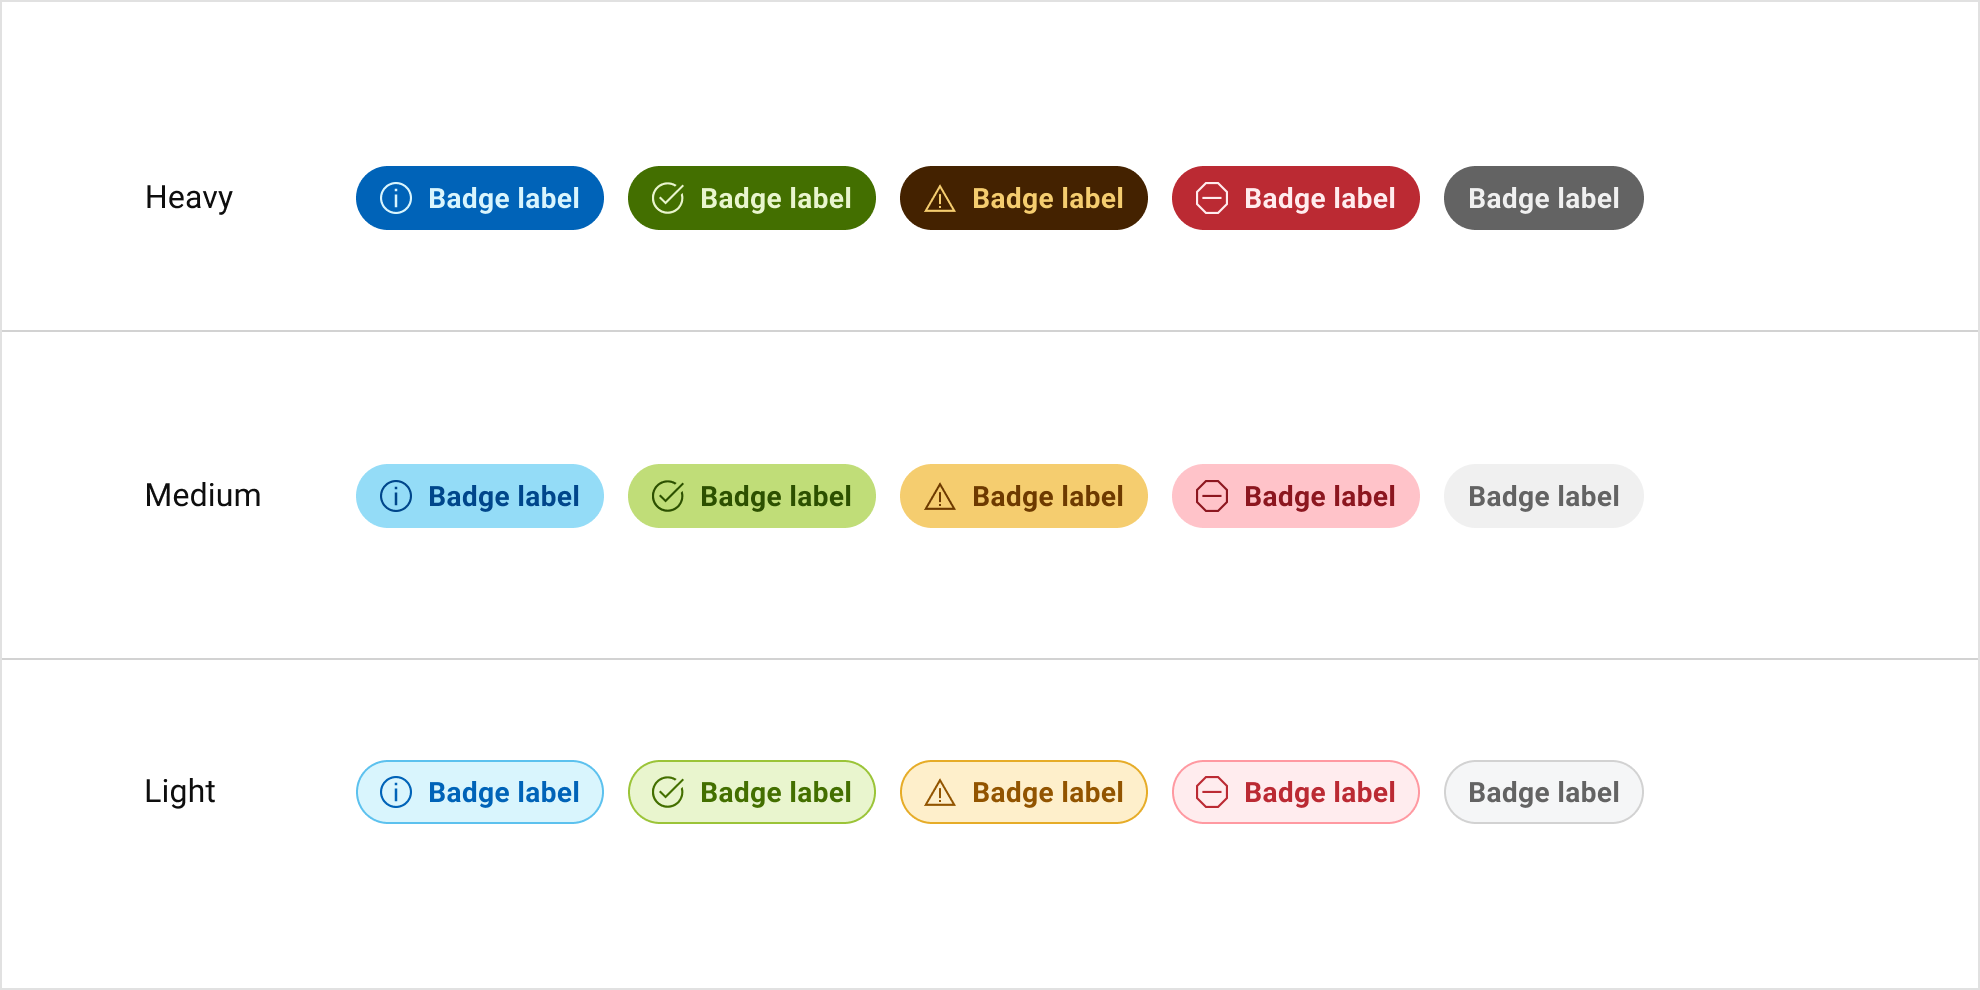 Image showing the 3 levels of color emphasis for semantic and neutral badges.